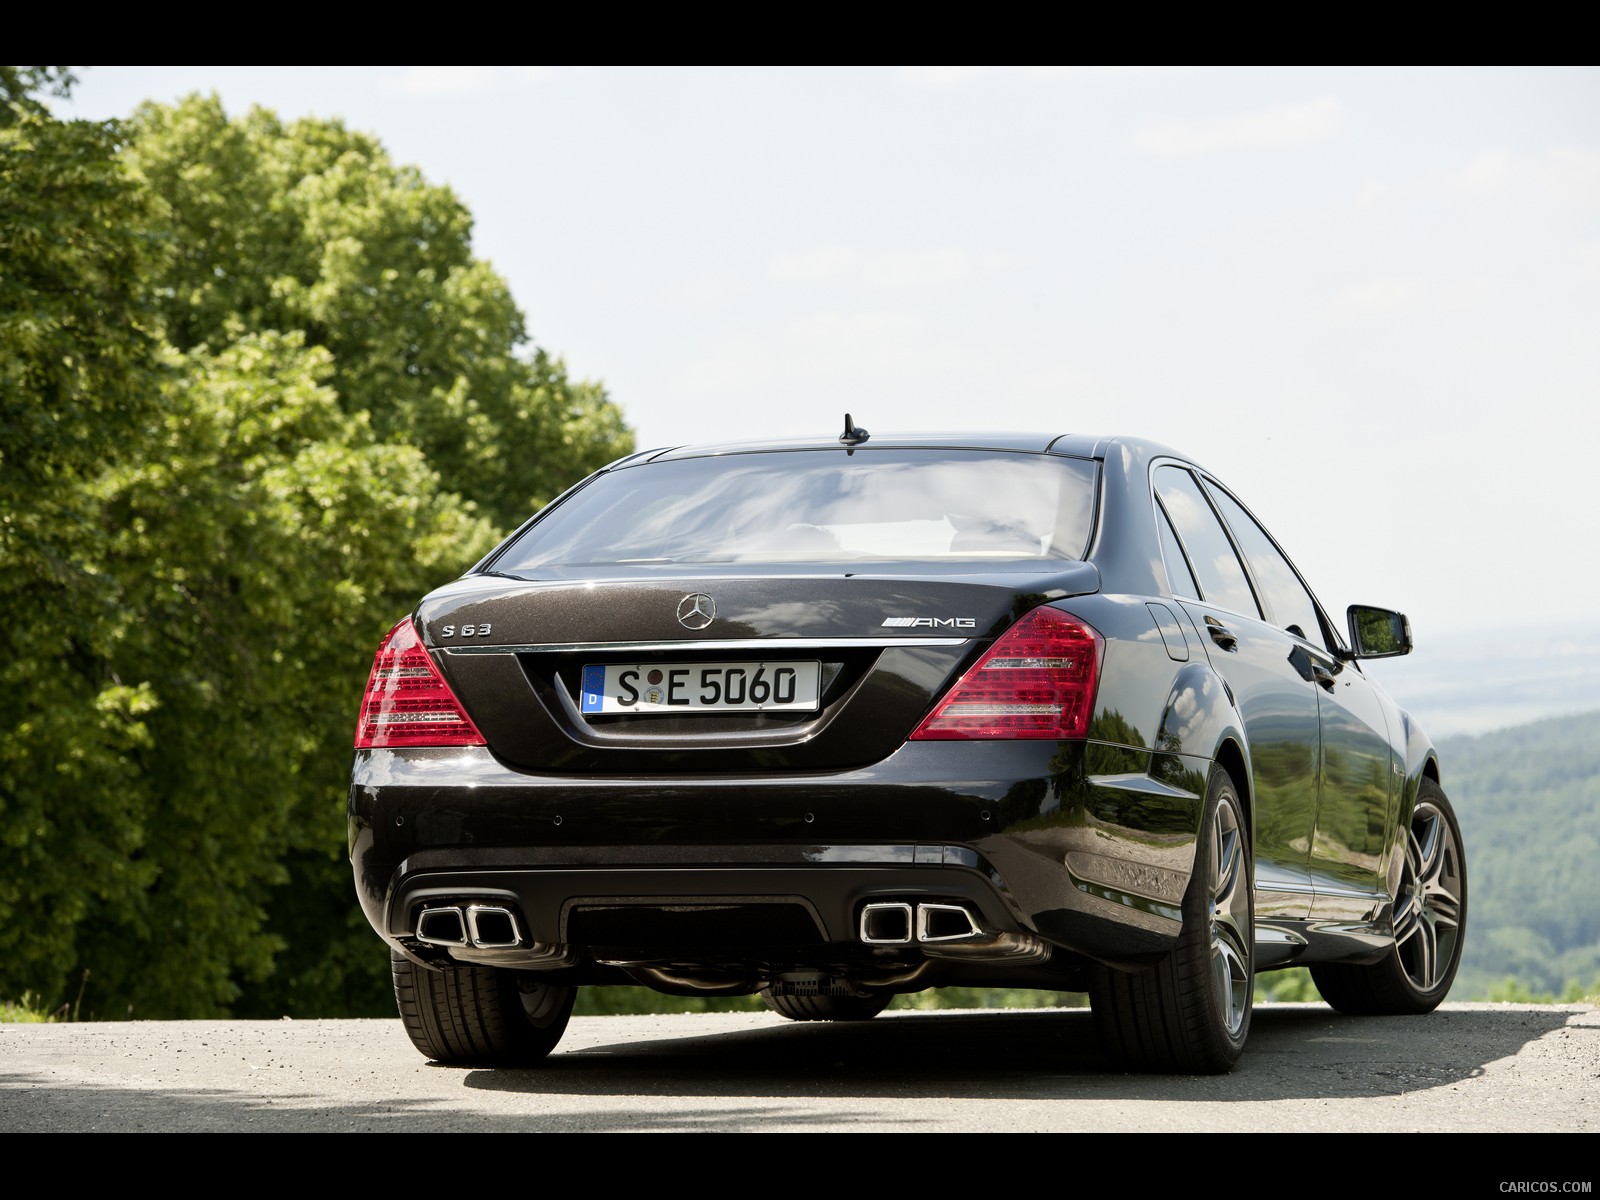 Mercedes-Benz S63 AMG (2011)  - Rear , #2 of 34